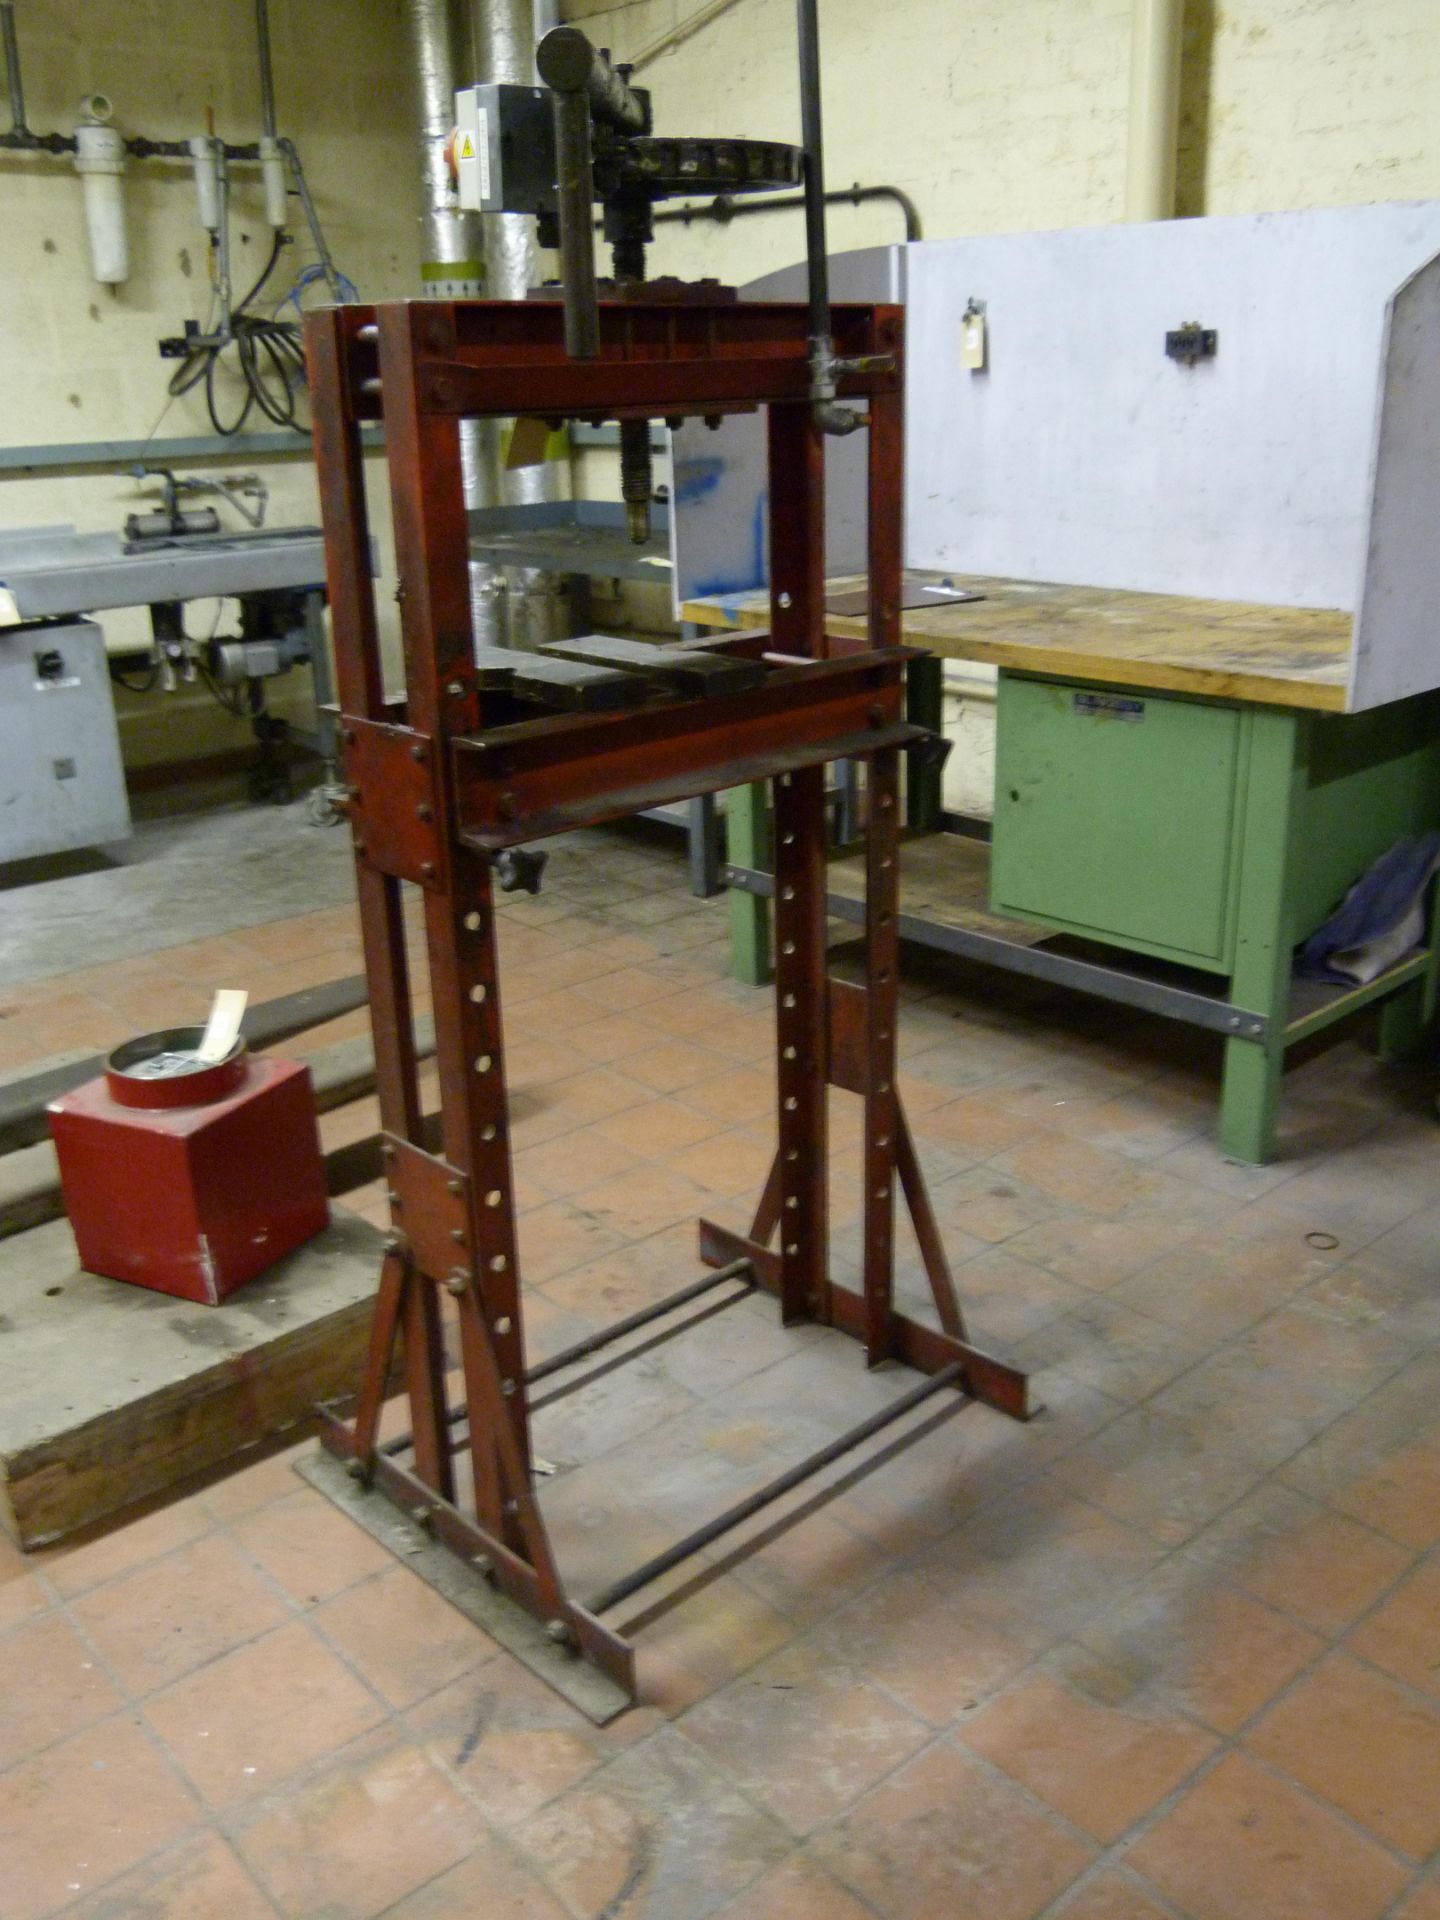 A Harvey and Frost floor standing manual workshop press